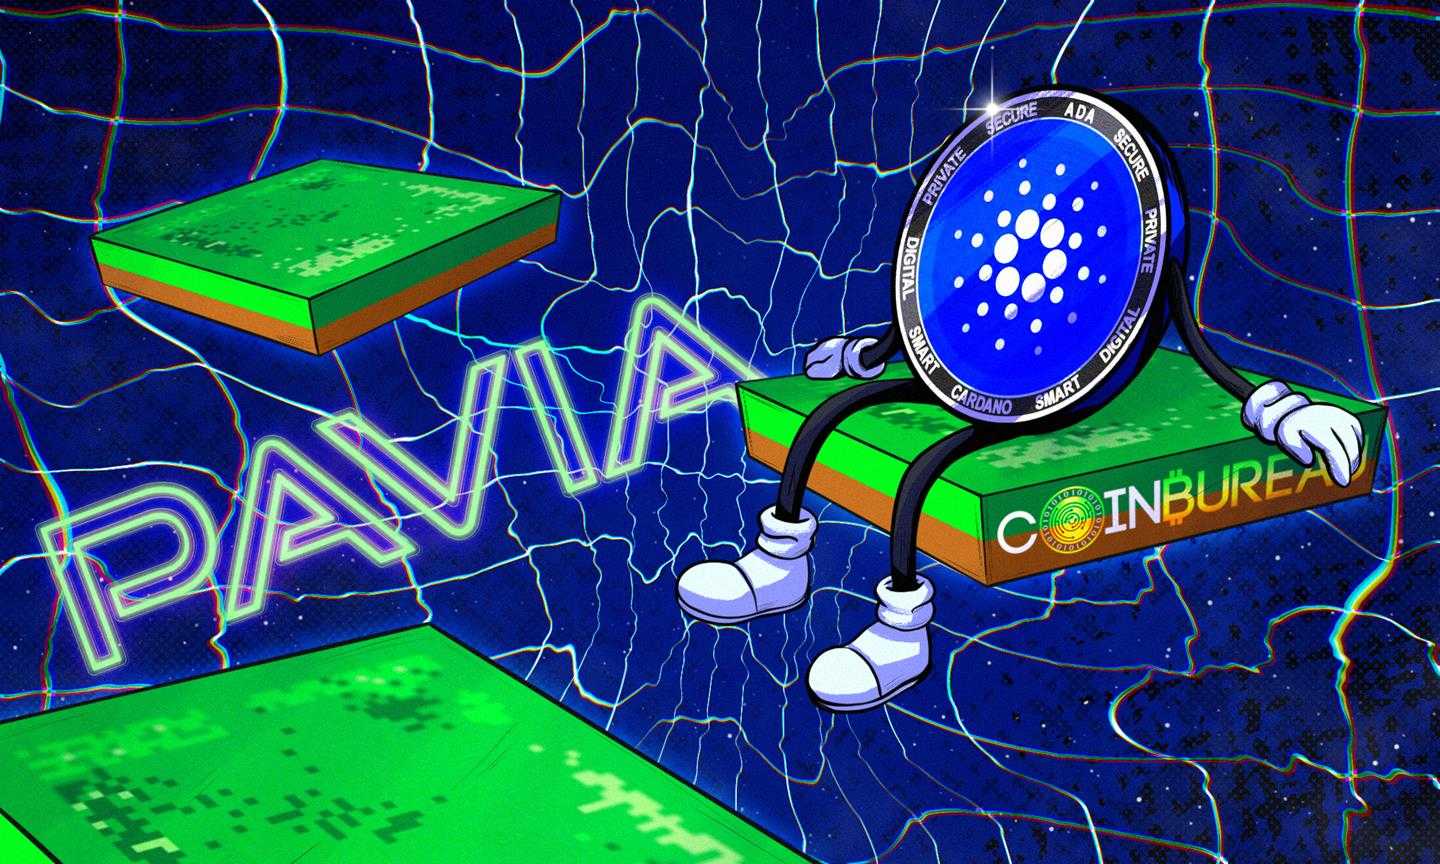 The Pavia Metaverse- Cardano's Decentraland or something more?